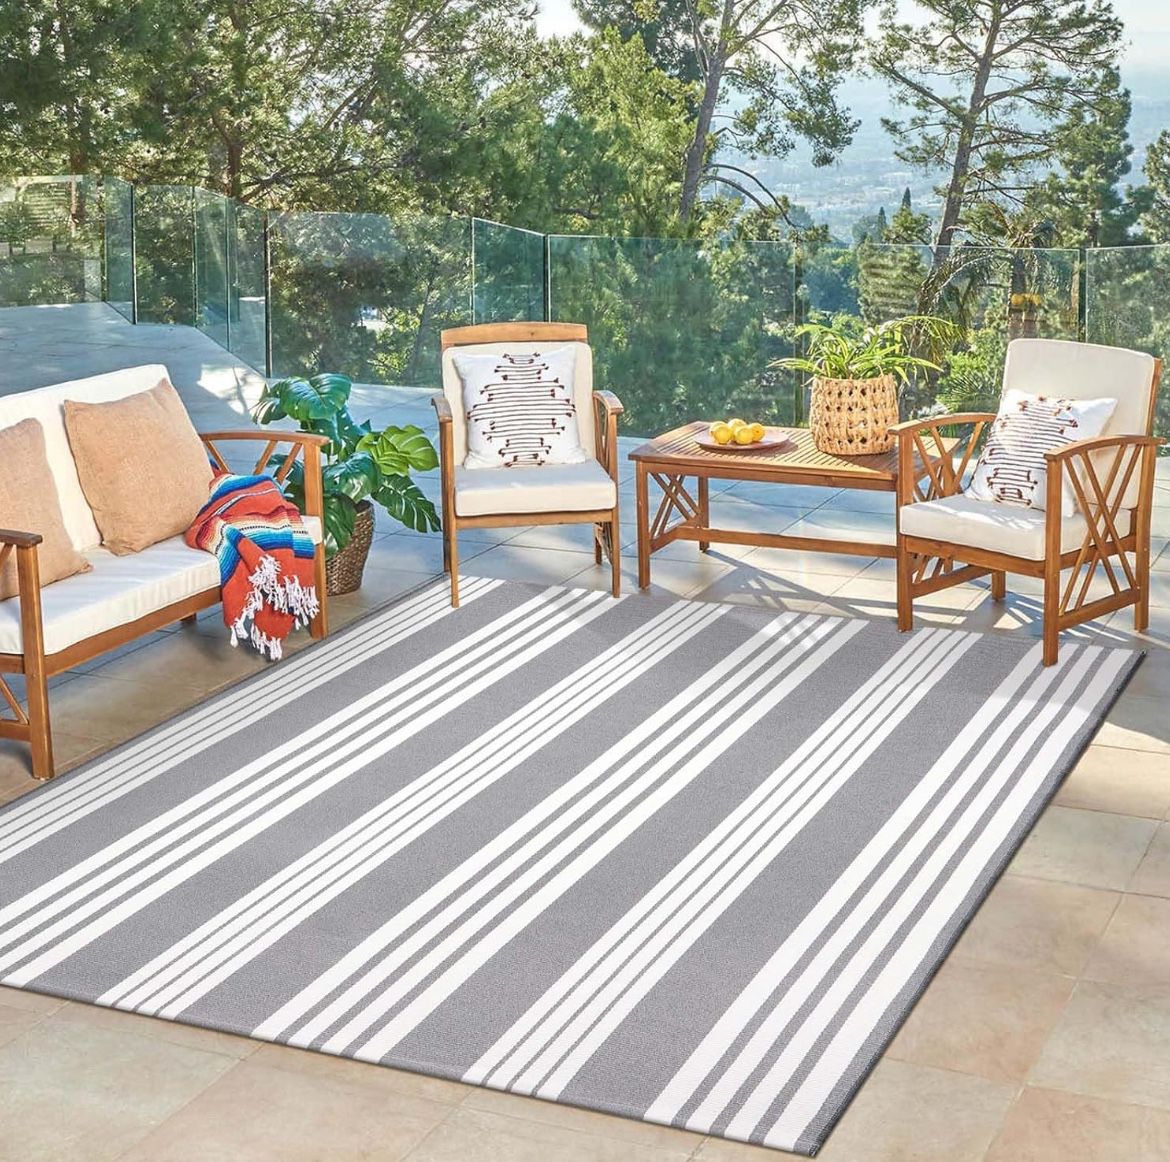 4'x6' Washable Reversible Hand-Woven Grey and White Striped Outdoor Rug, NEW, $35 Each